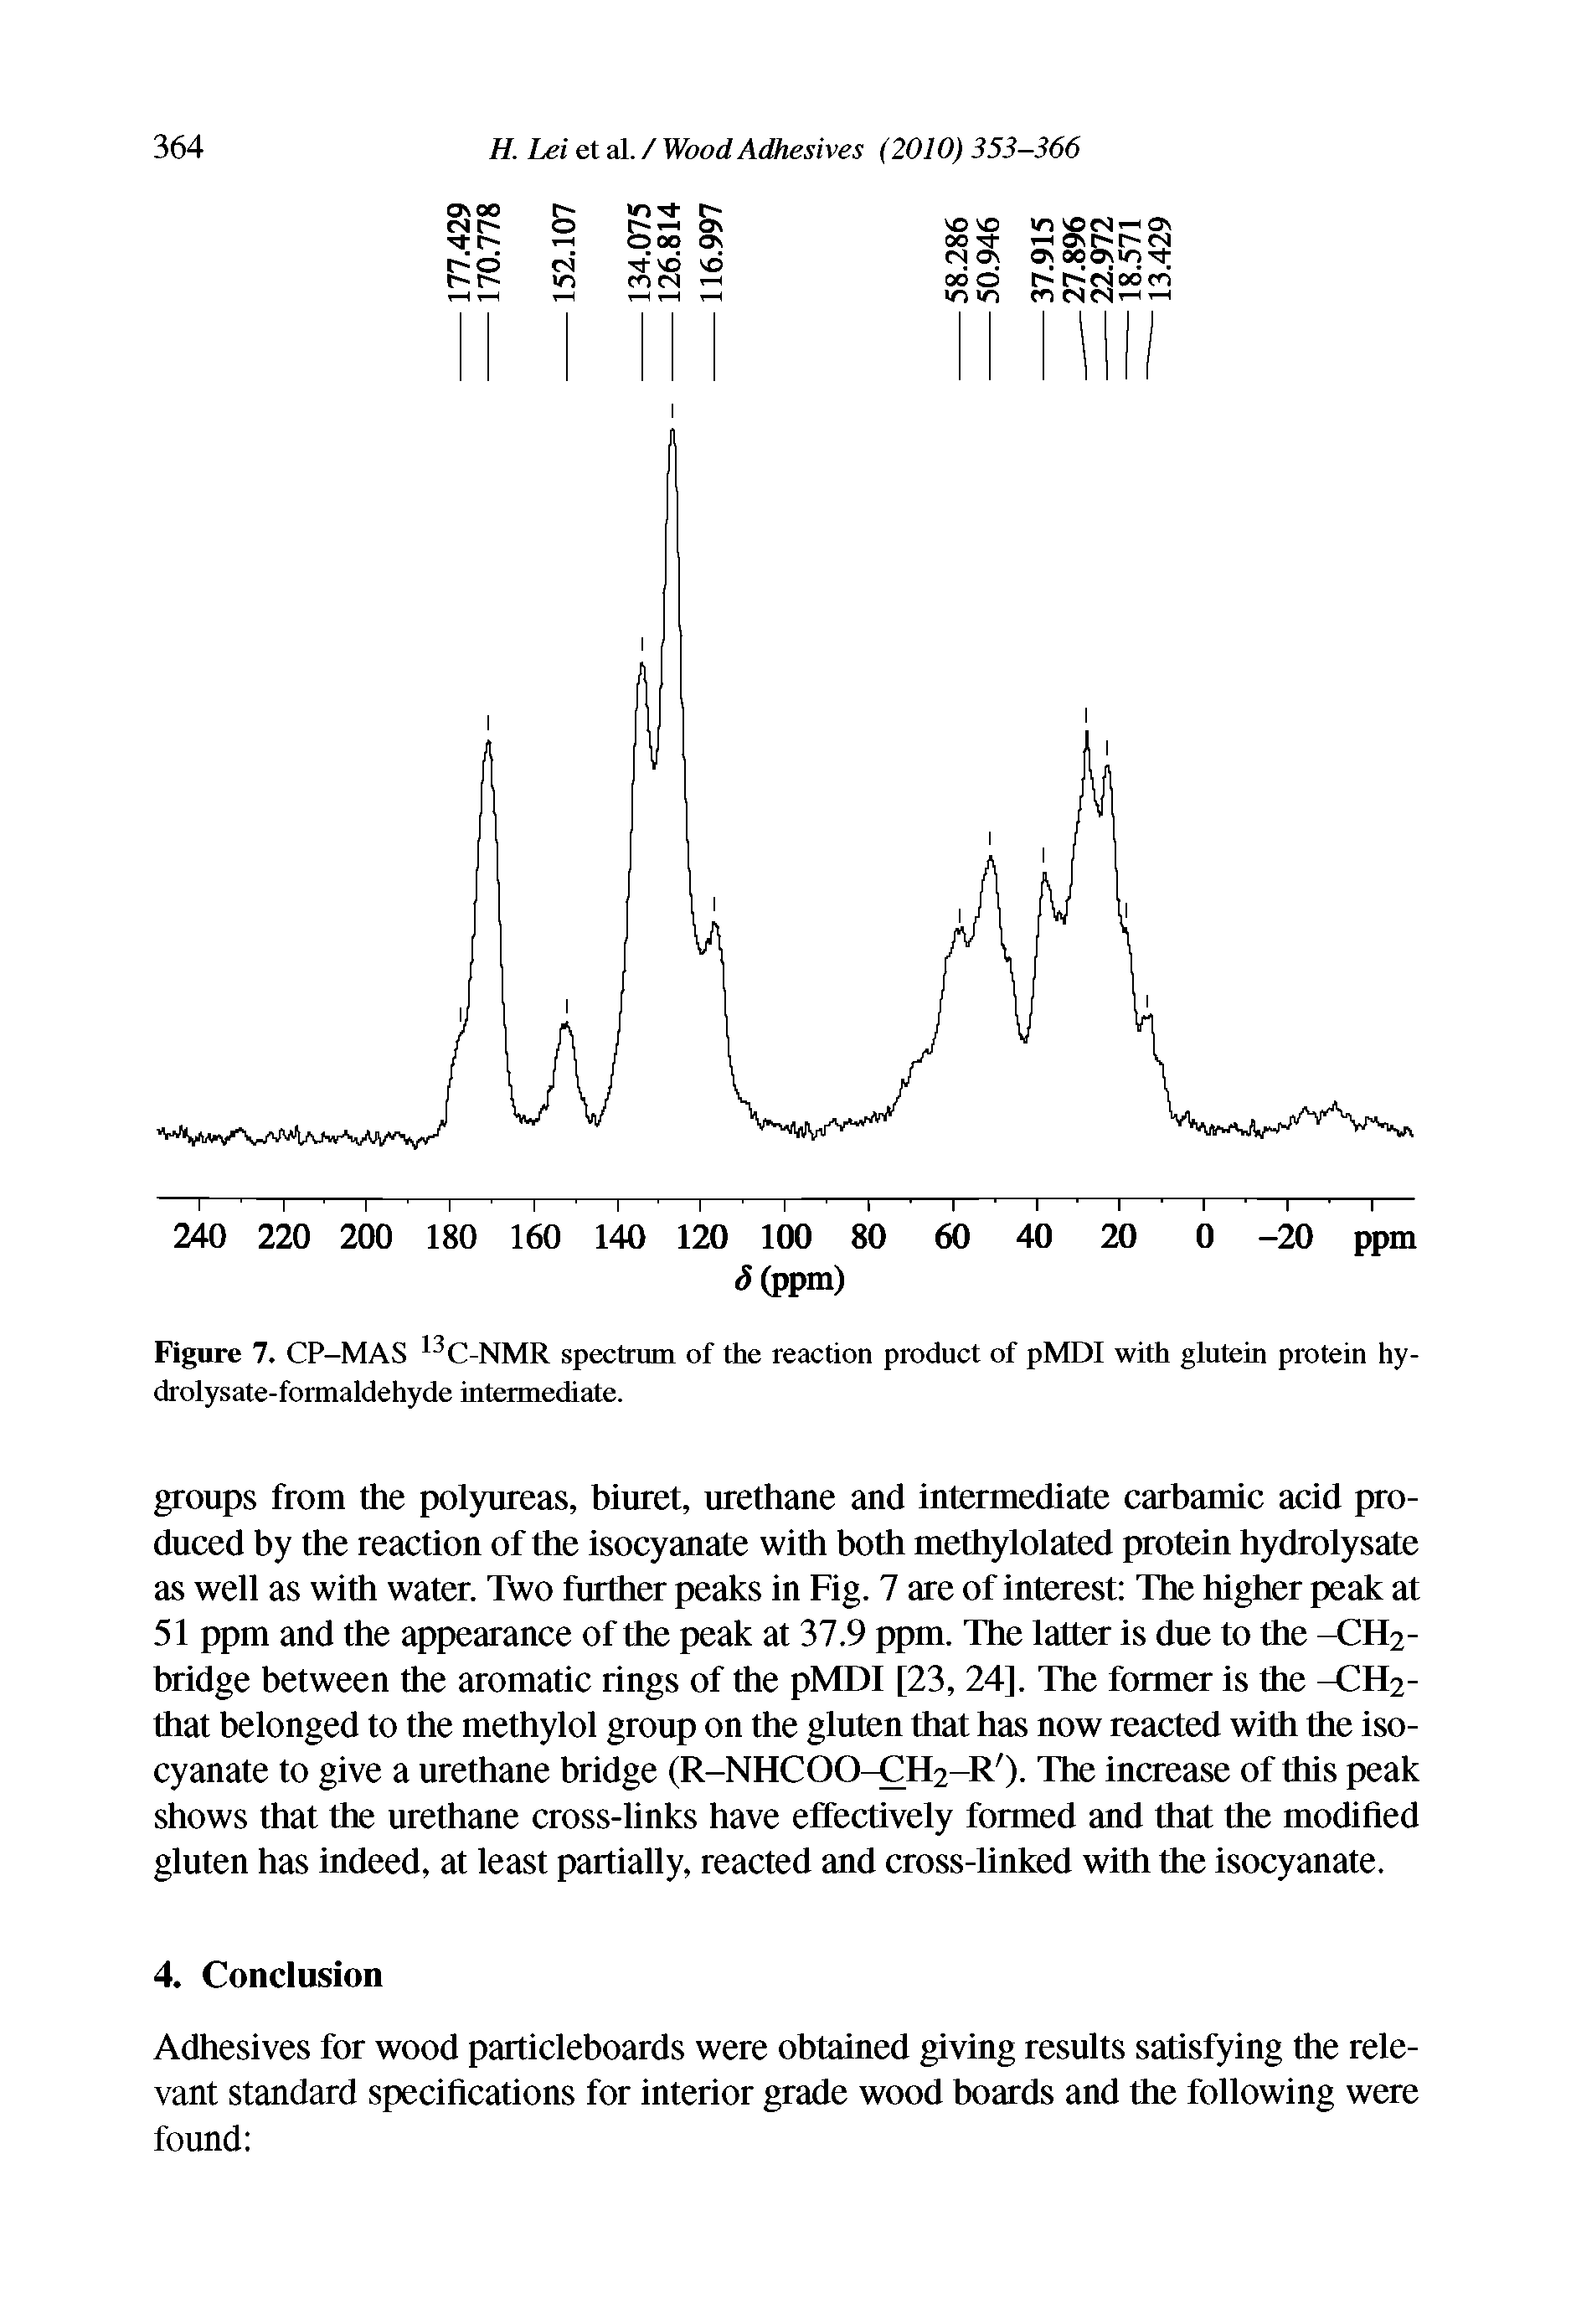 Figure 7. CP-MAS C-NMR spectrum of the reaction product of pMDI with glutein protein hydrolysate-formaldehyde intermediate.